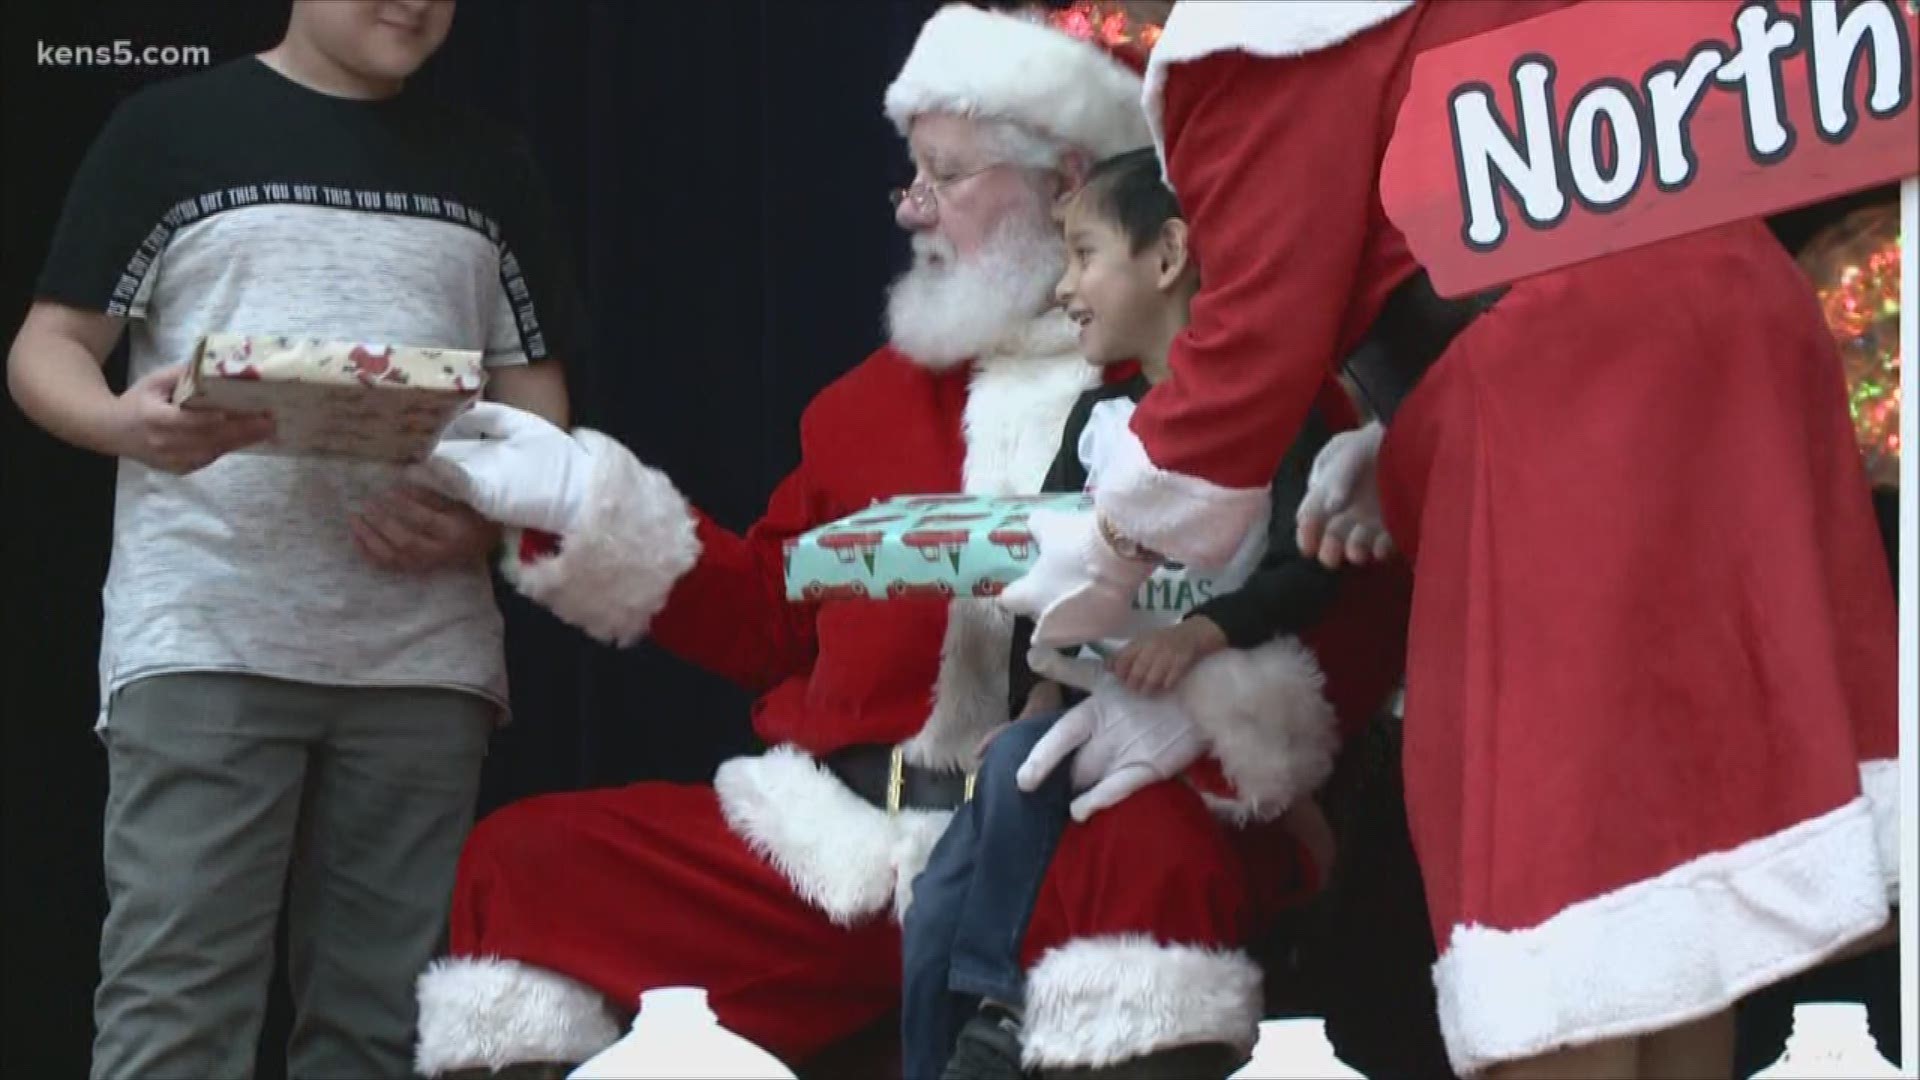 Hundreds of local kids were treated to quite the holiday party Sunday.